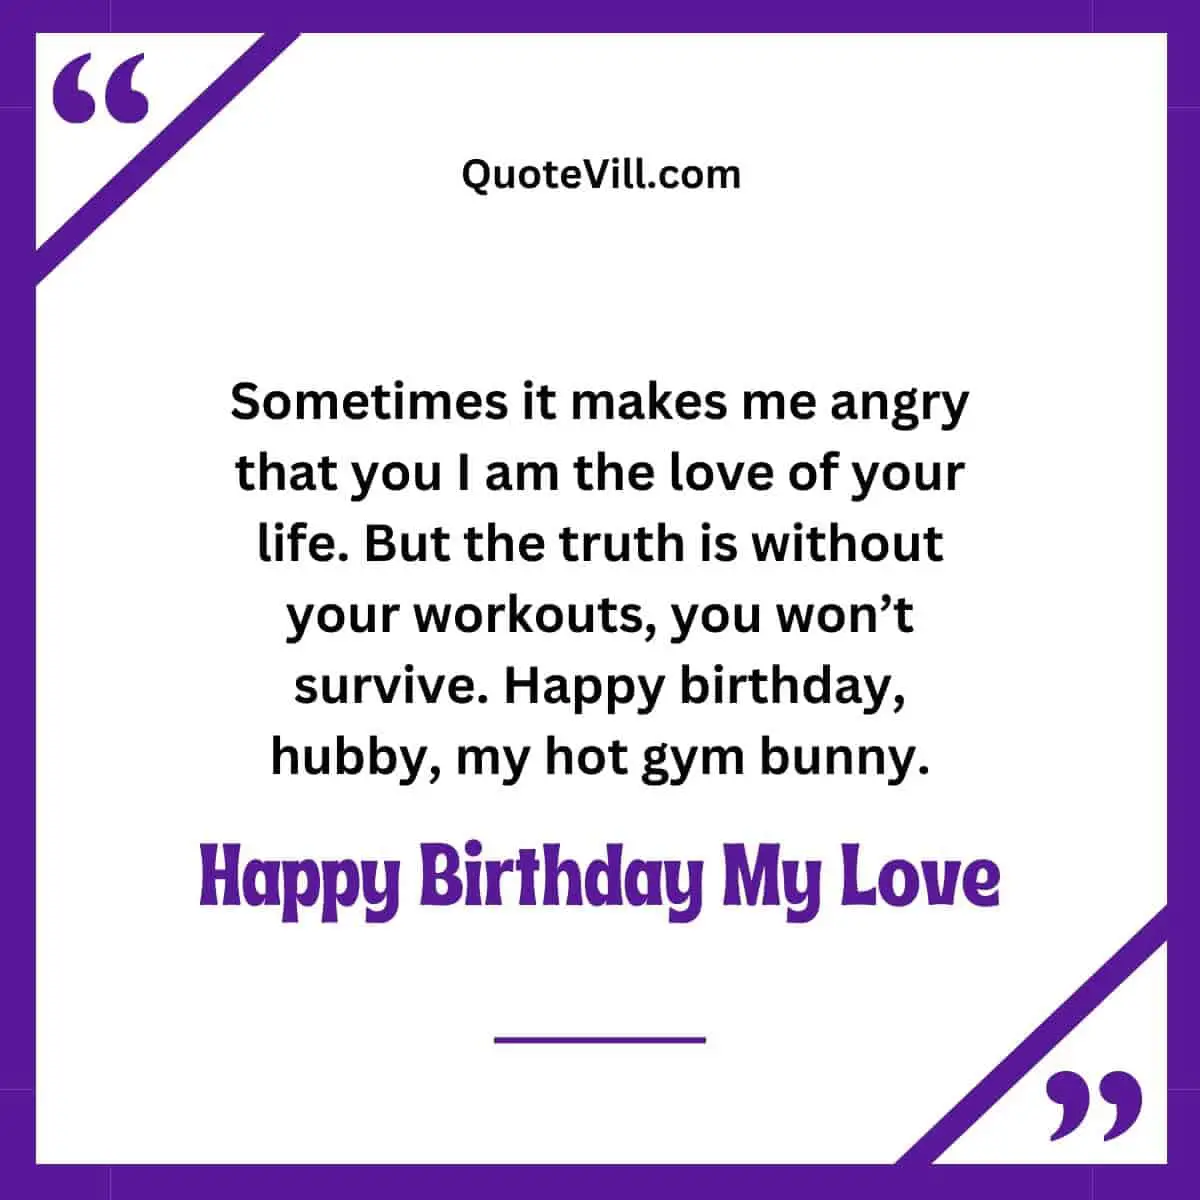 Funny Birthday Messages for Husband